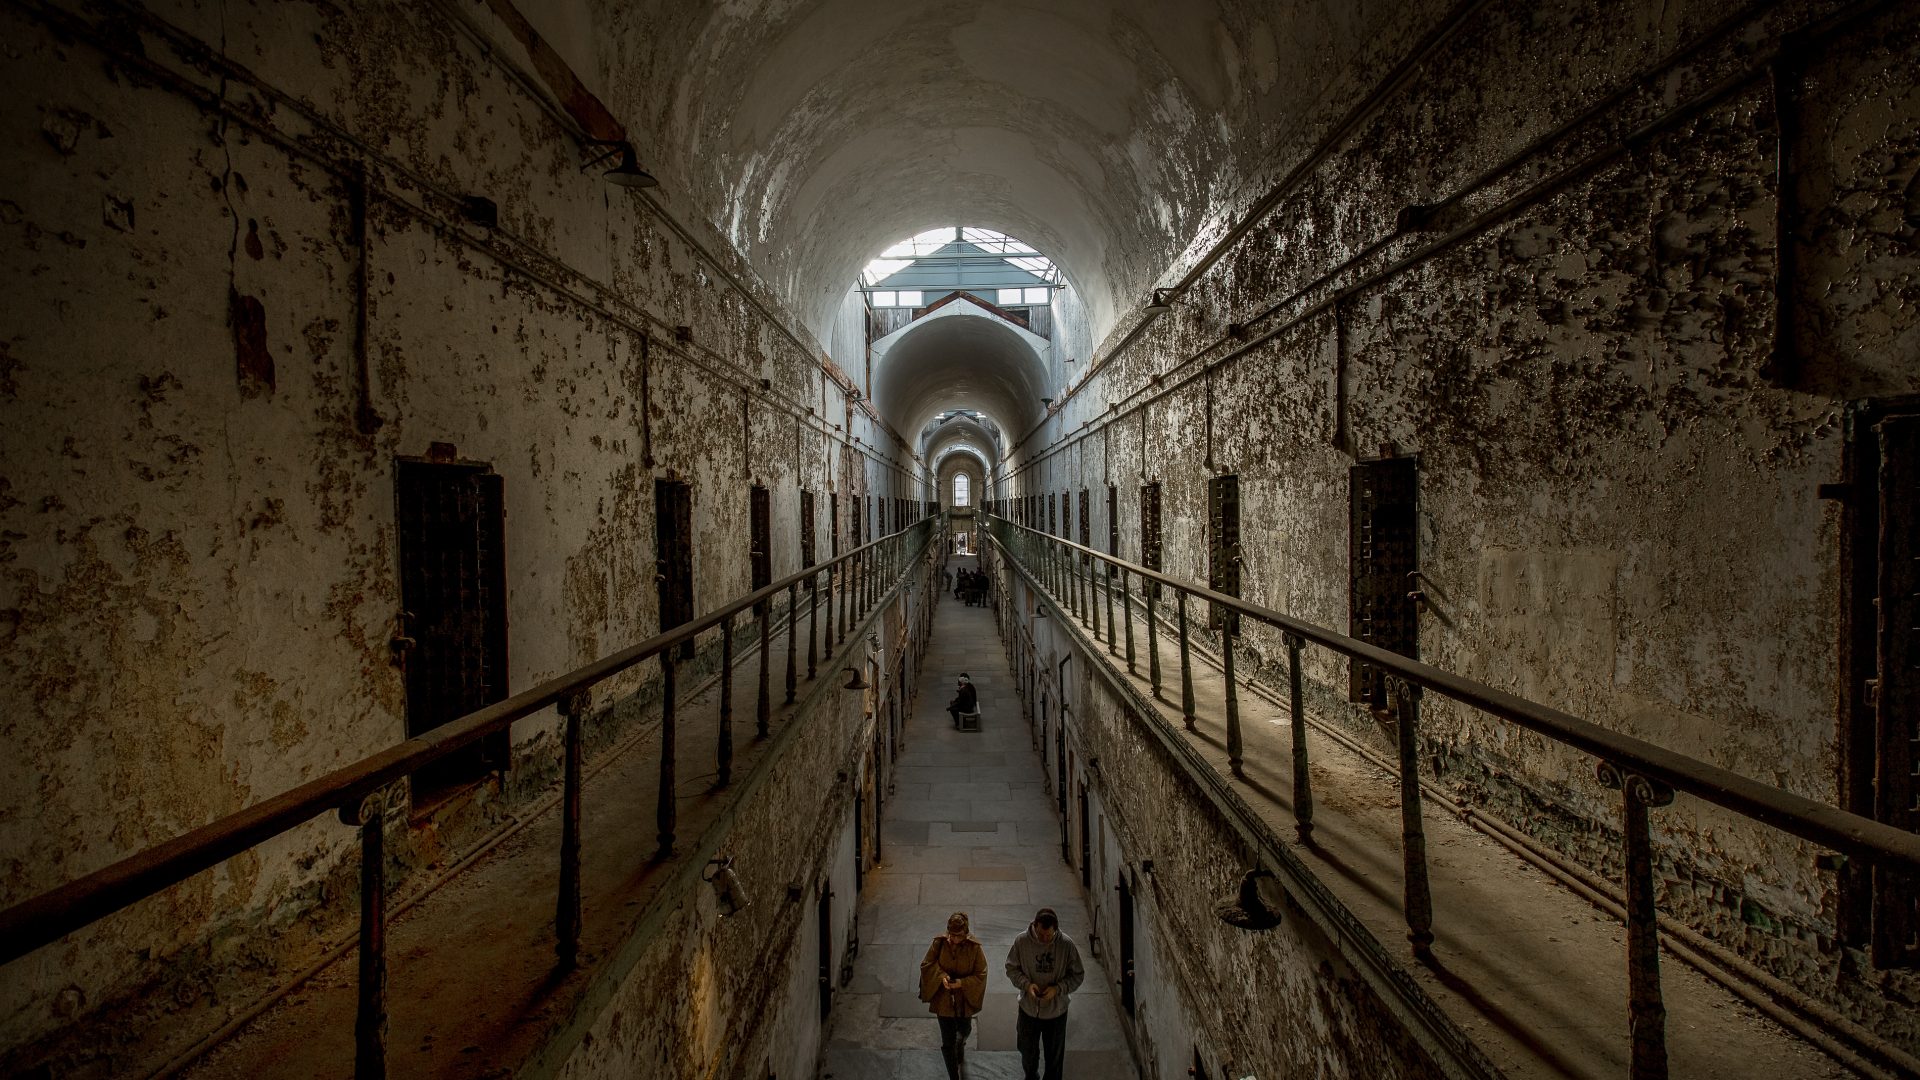 After 1836, cells started to be built with two stories, but no sunlight at Eastern State Penitentiary.